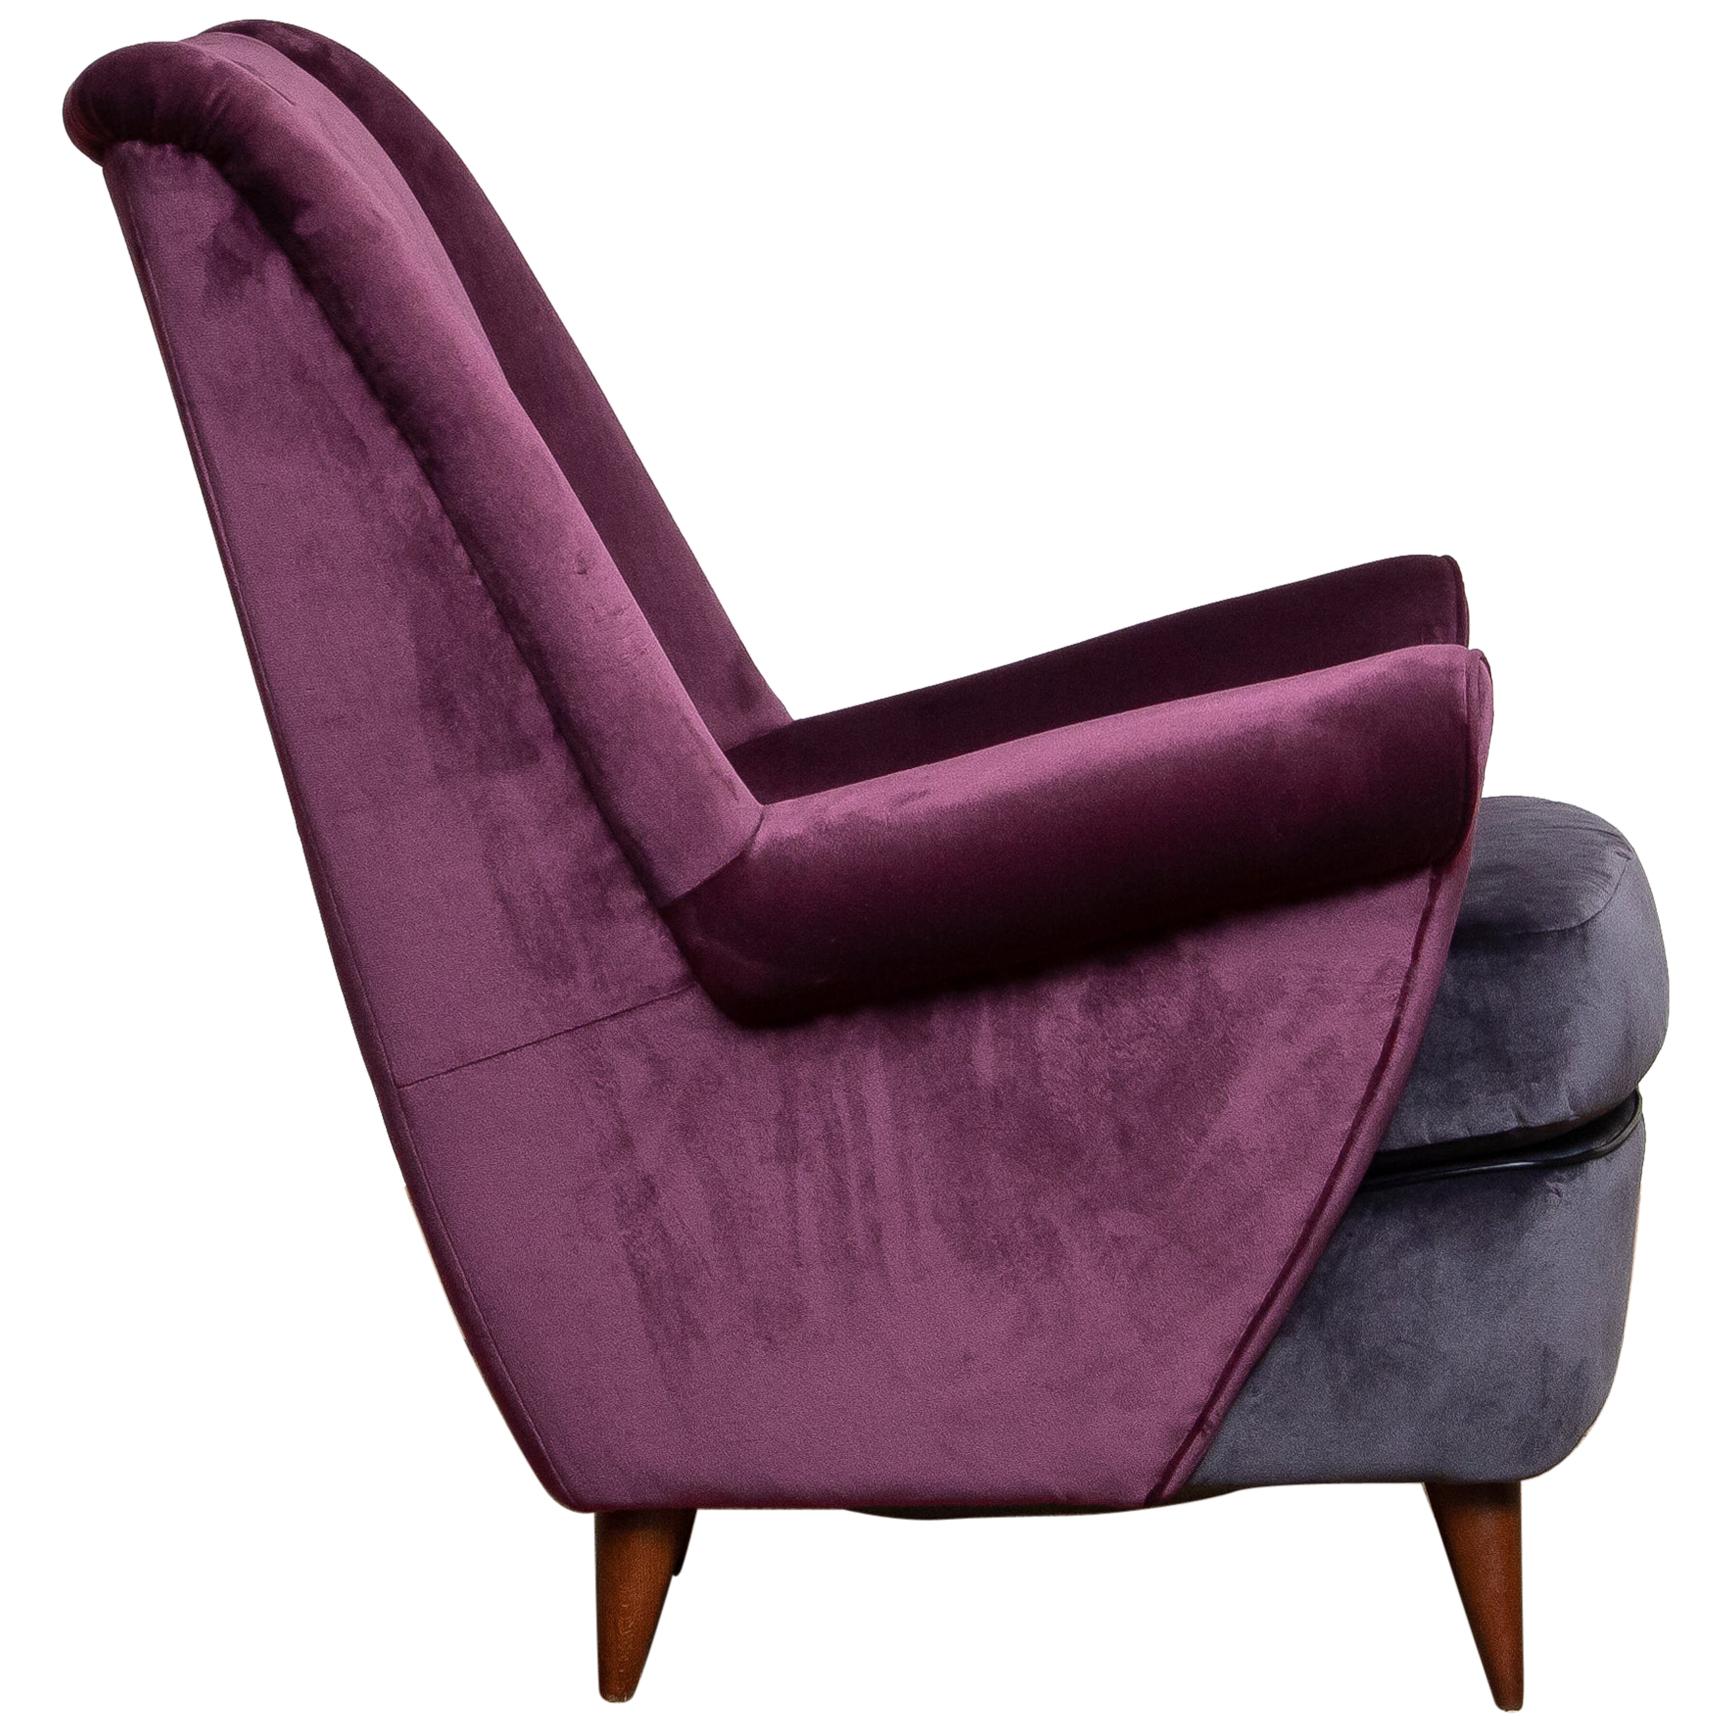 Mid-Century Modern 50's Lounge / Easy Chair in Magenta by Designed Gio Ponti for ISA Bergamo, Italy